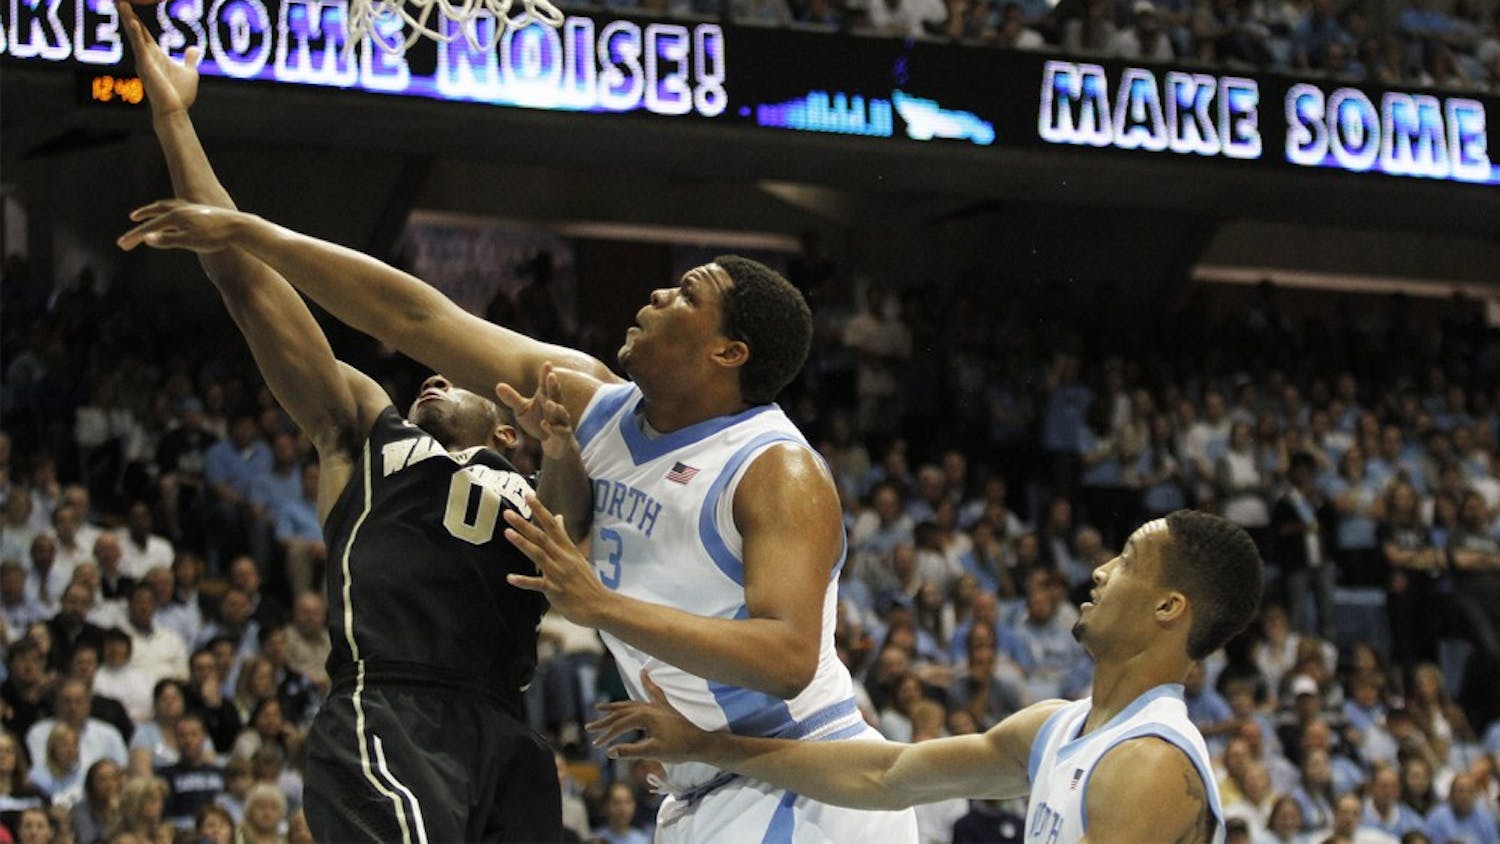 UNC Men's Basketball beat Wake Forest 105-72 on Saturday February 22. 